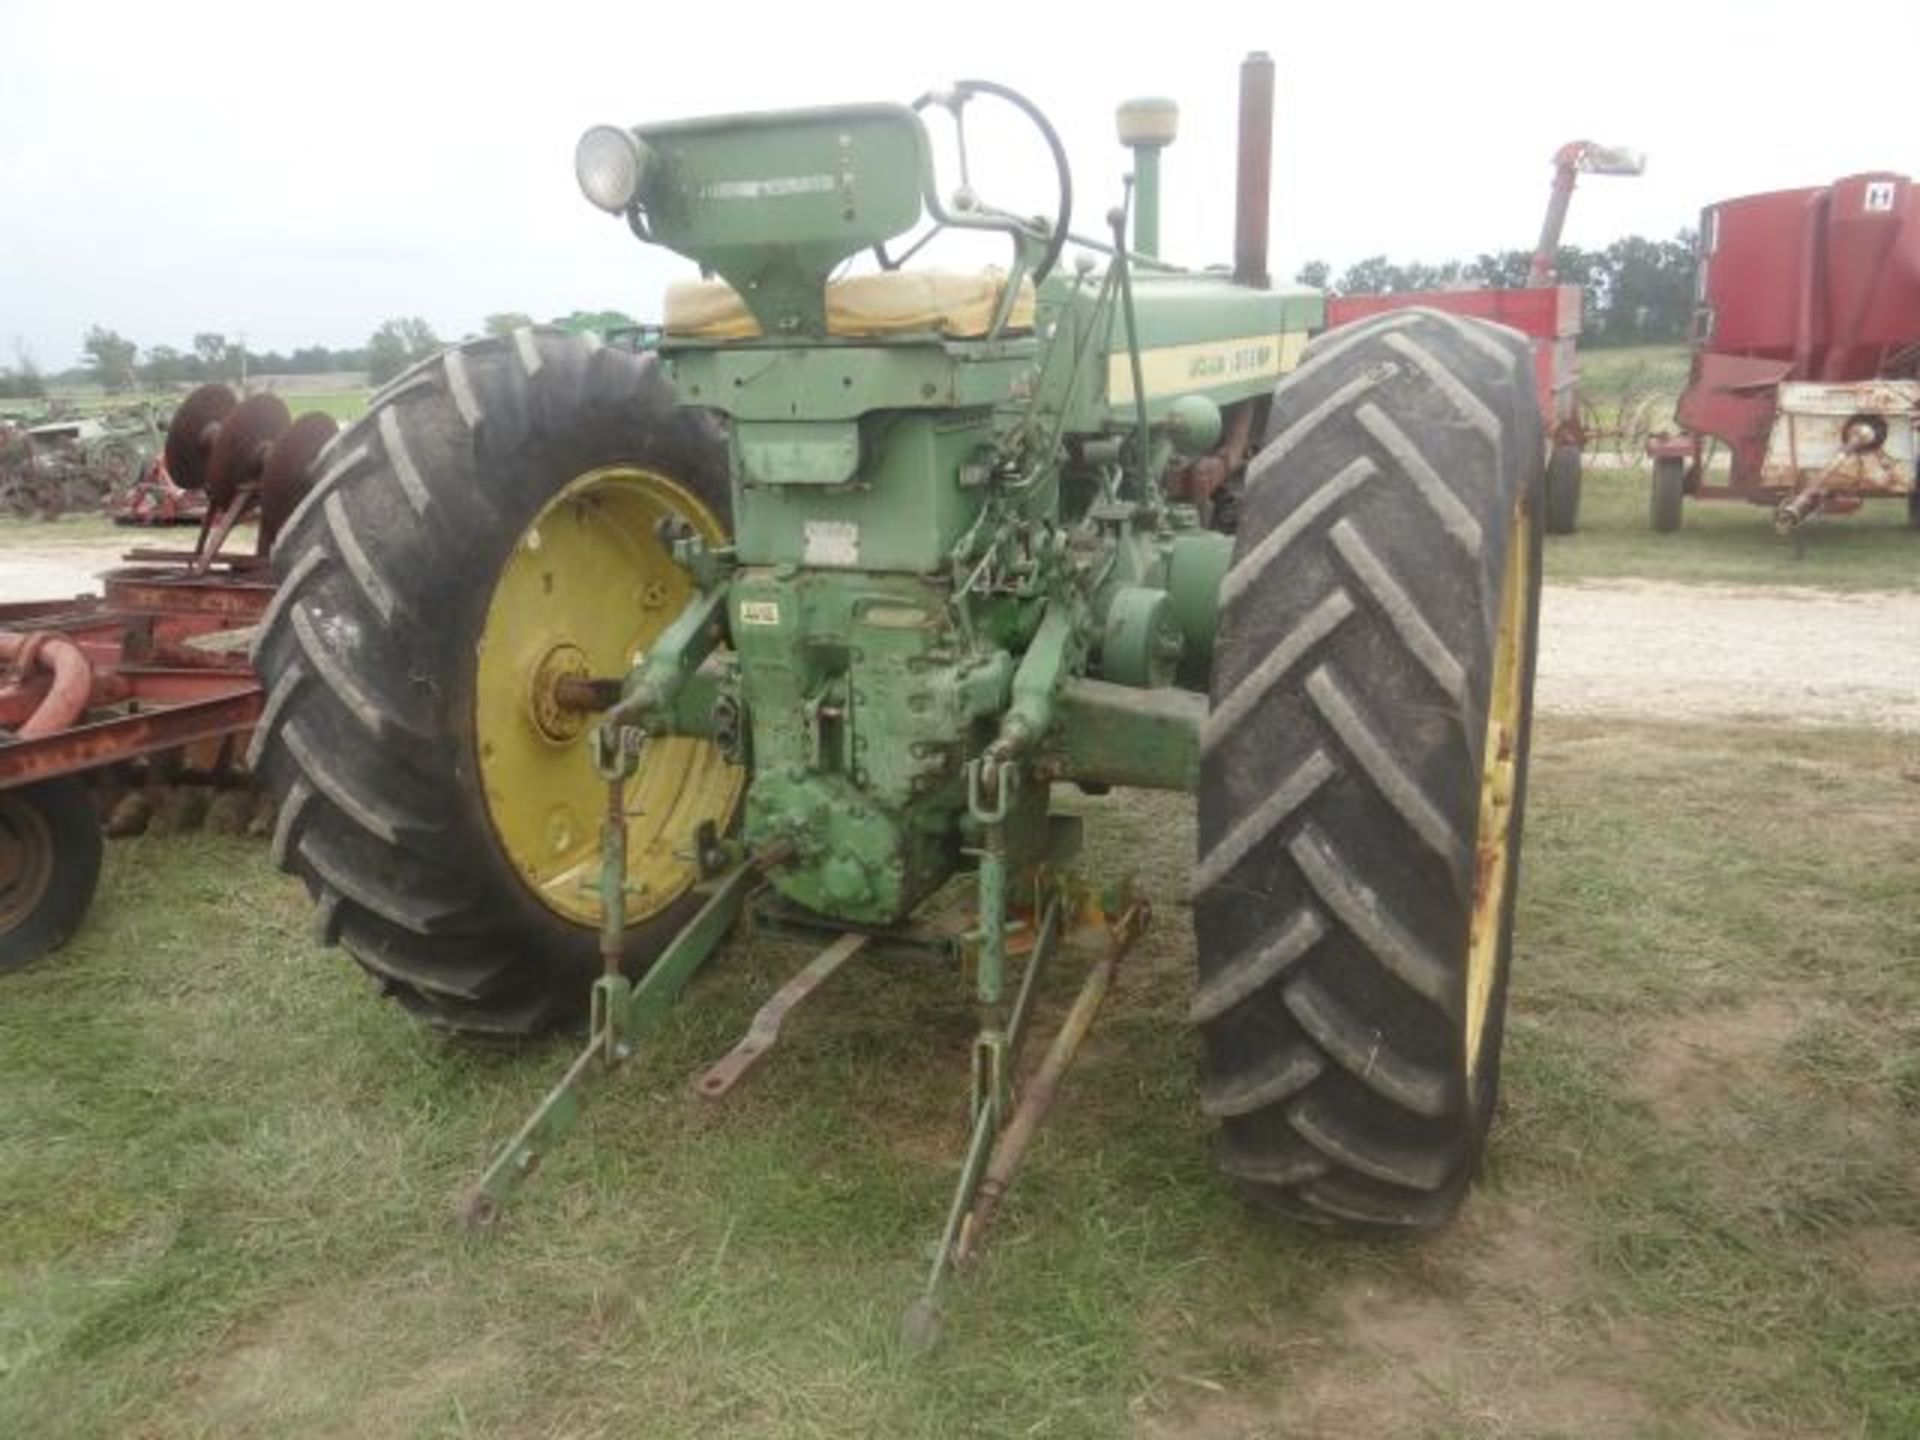 JD 620 Tractor Does Not Run, May be the carburetor - Image 3 of 3